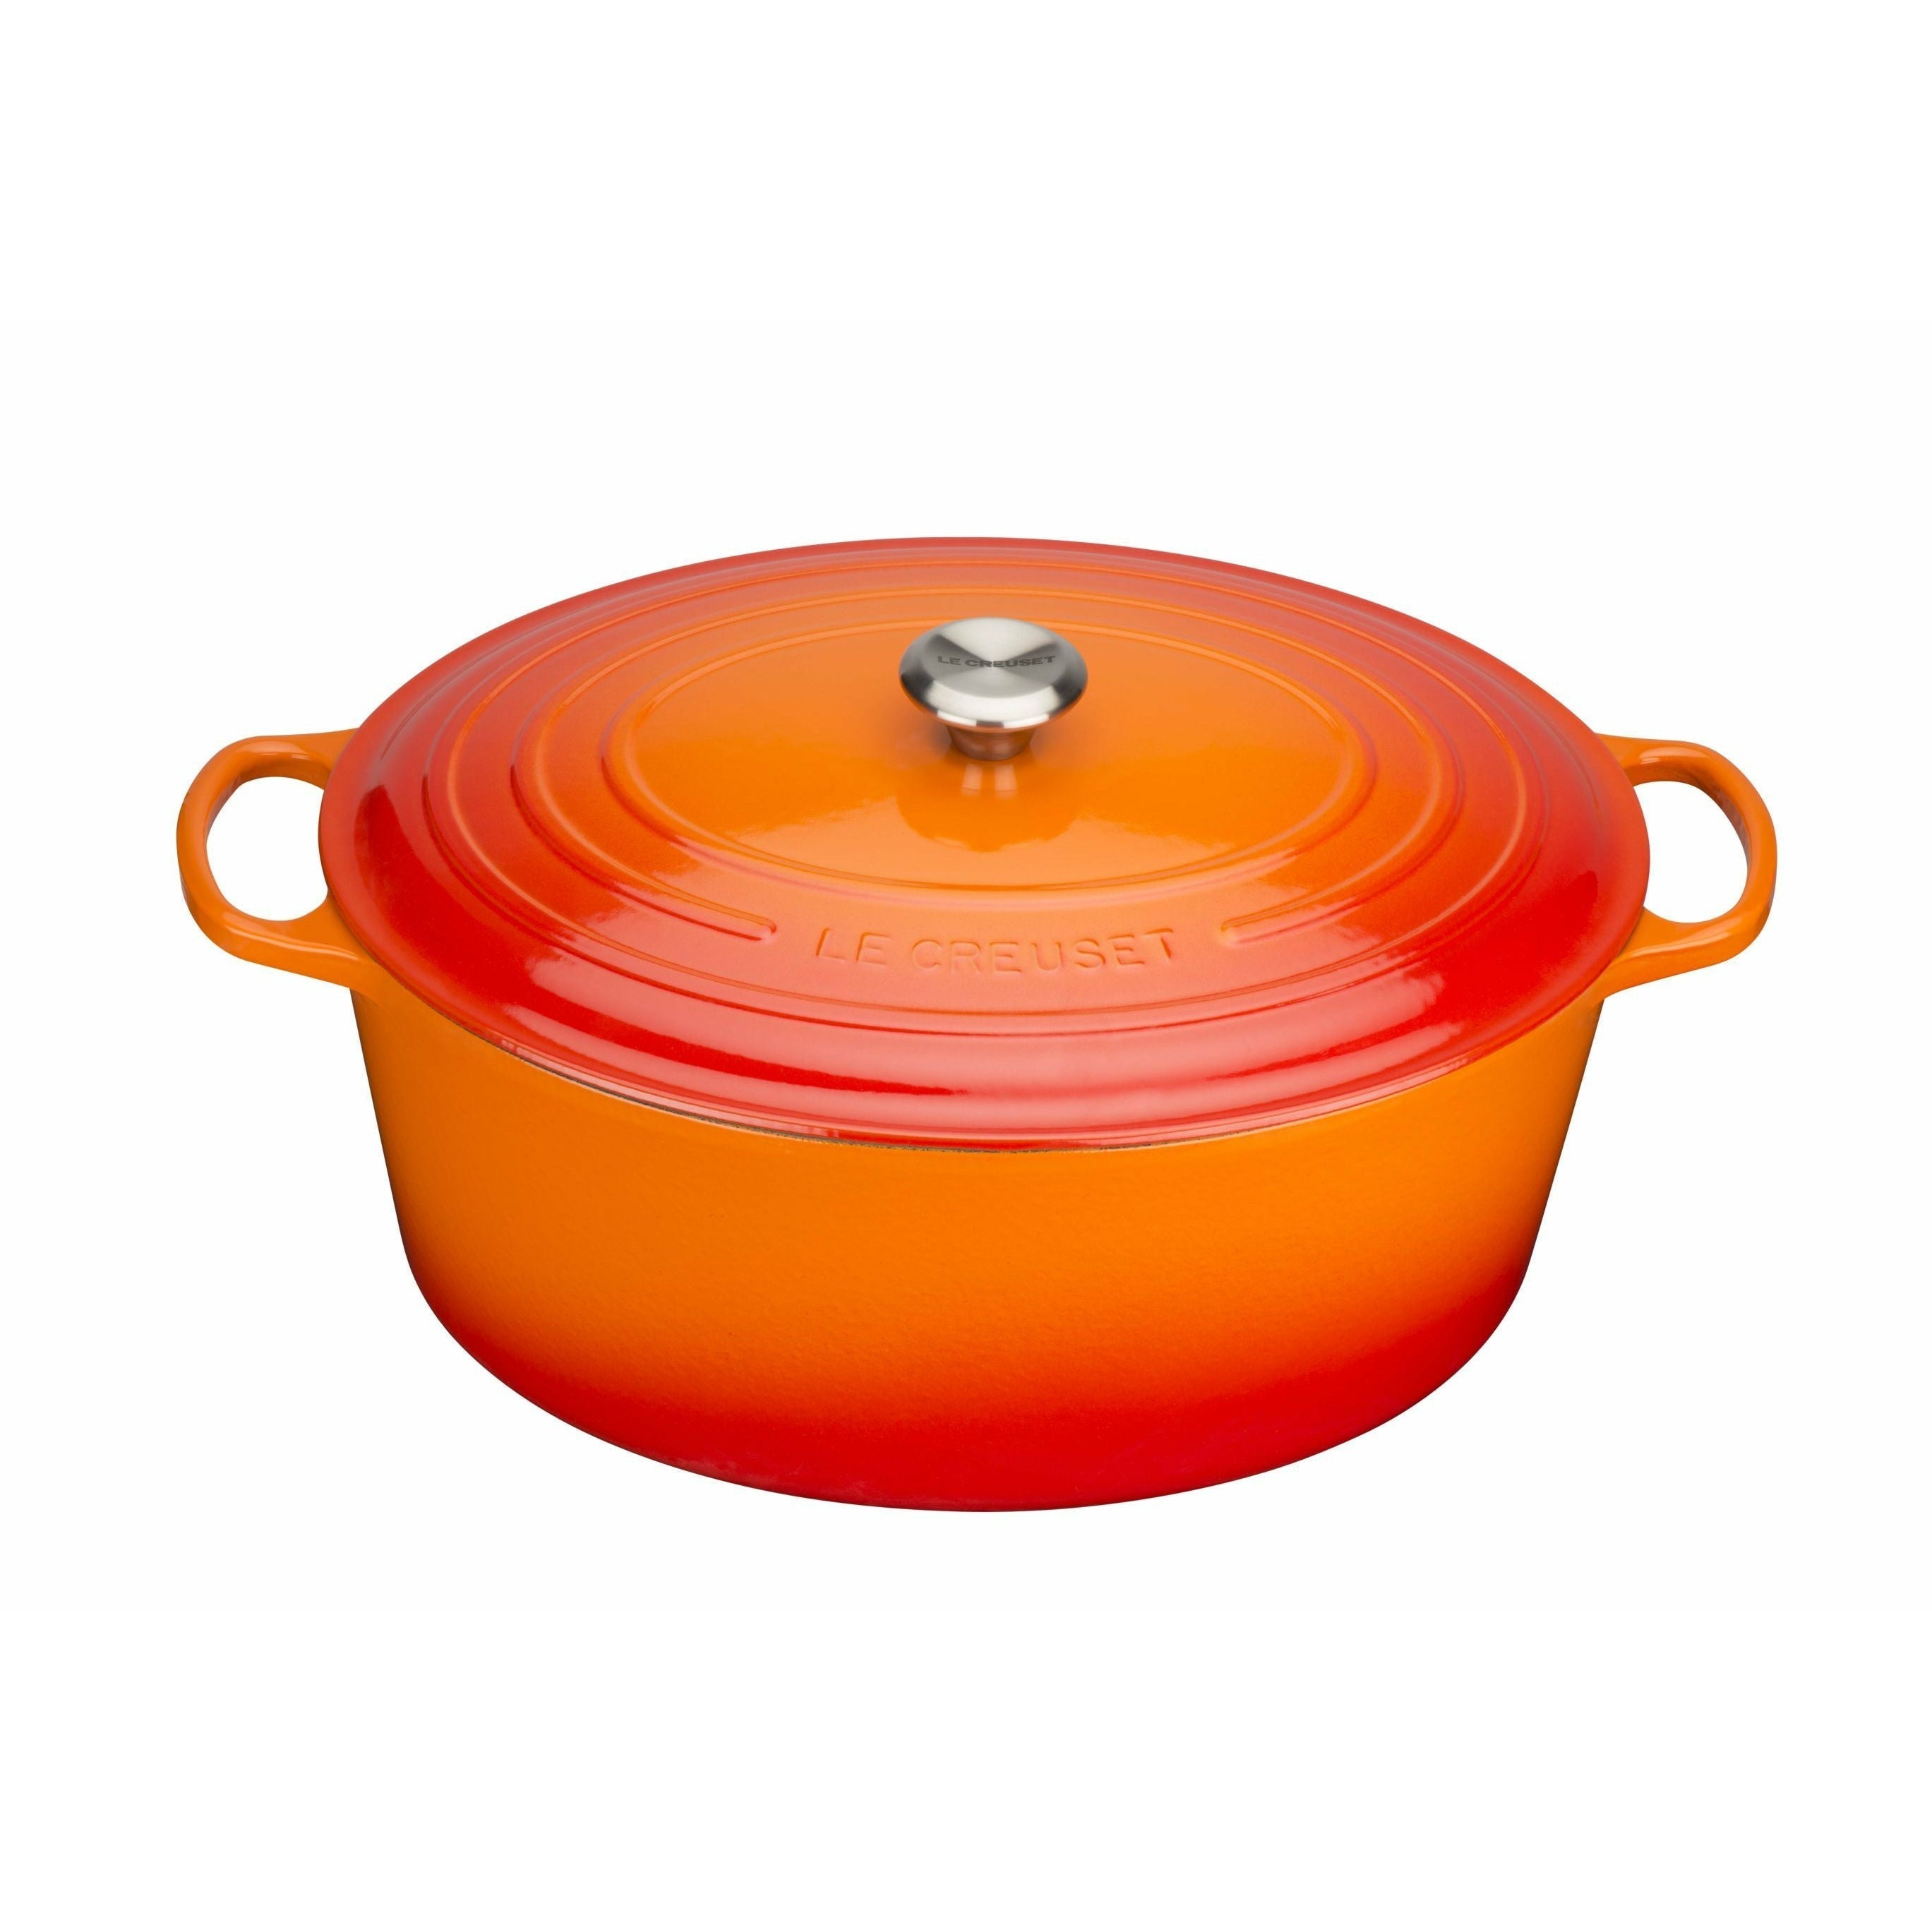 Le Creuset Signature Oval Roaster 40 Cm, Oven Red